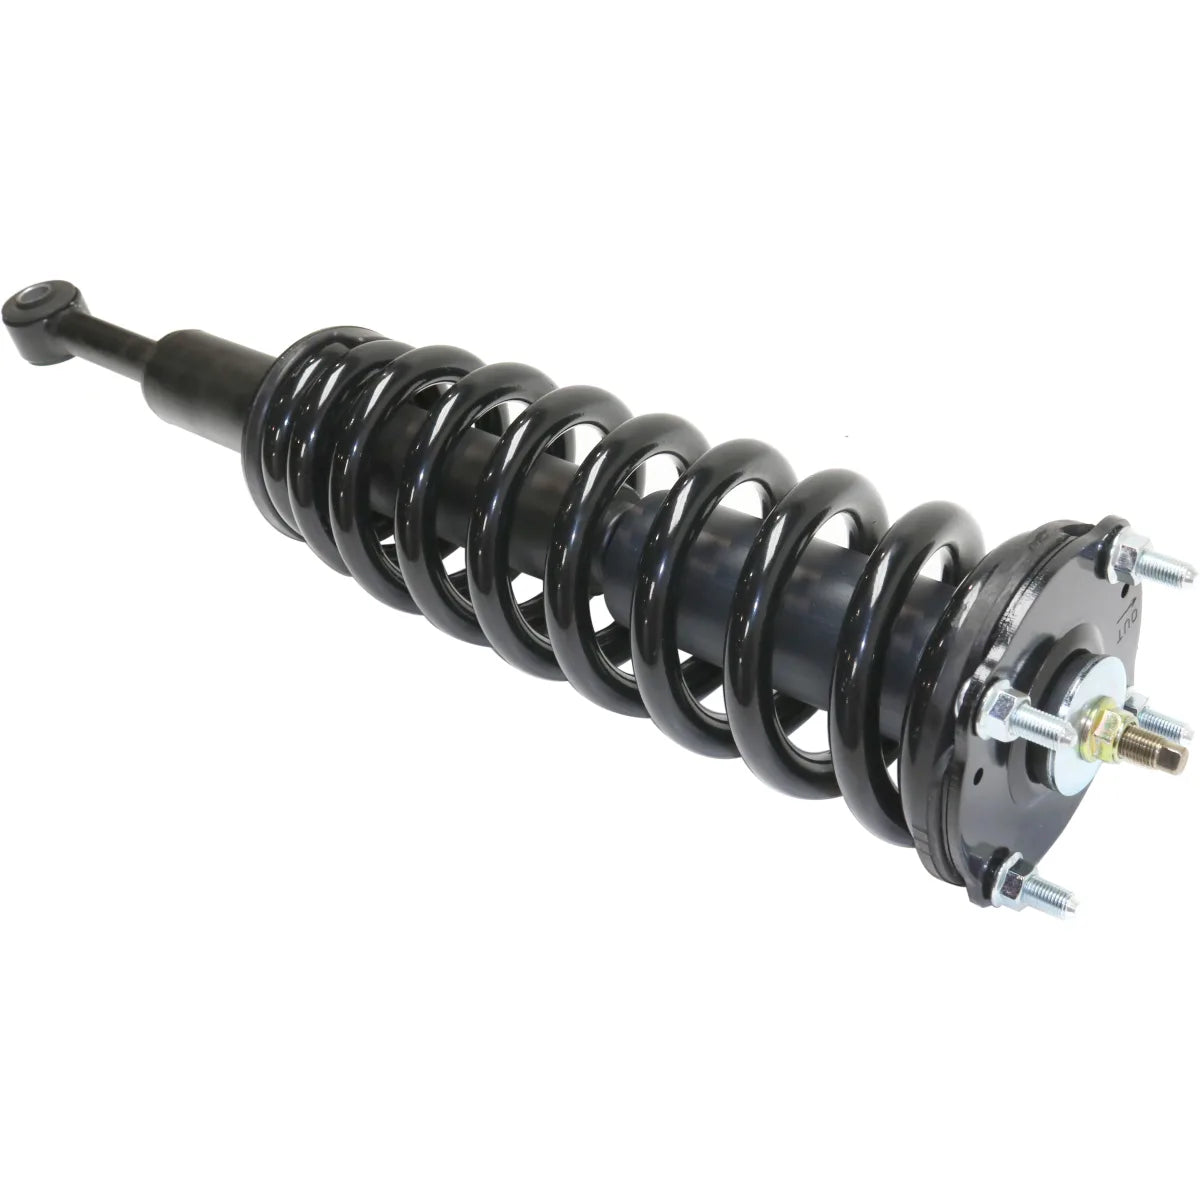 shock absorbers for 2000 tundra